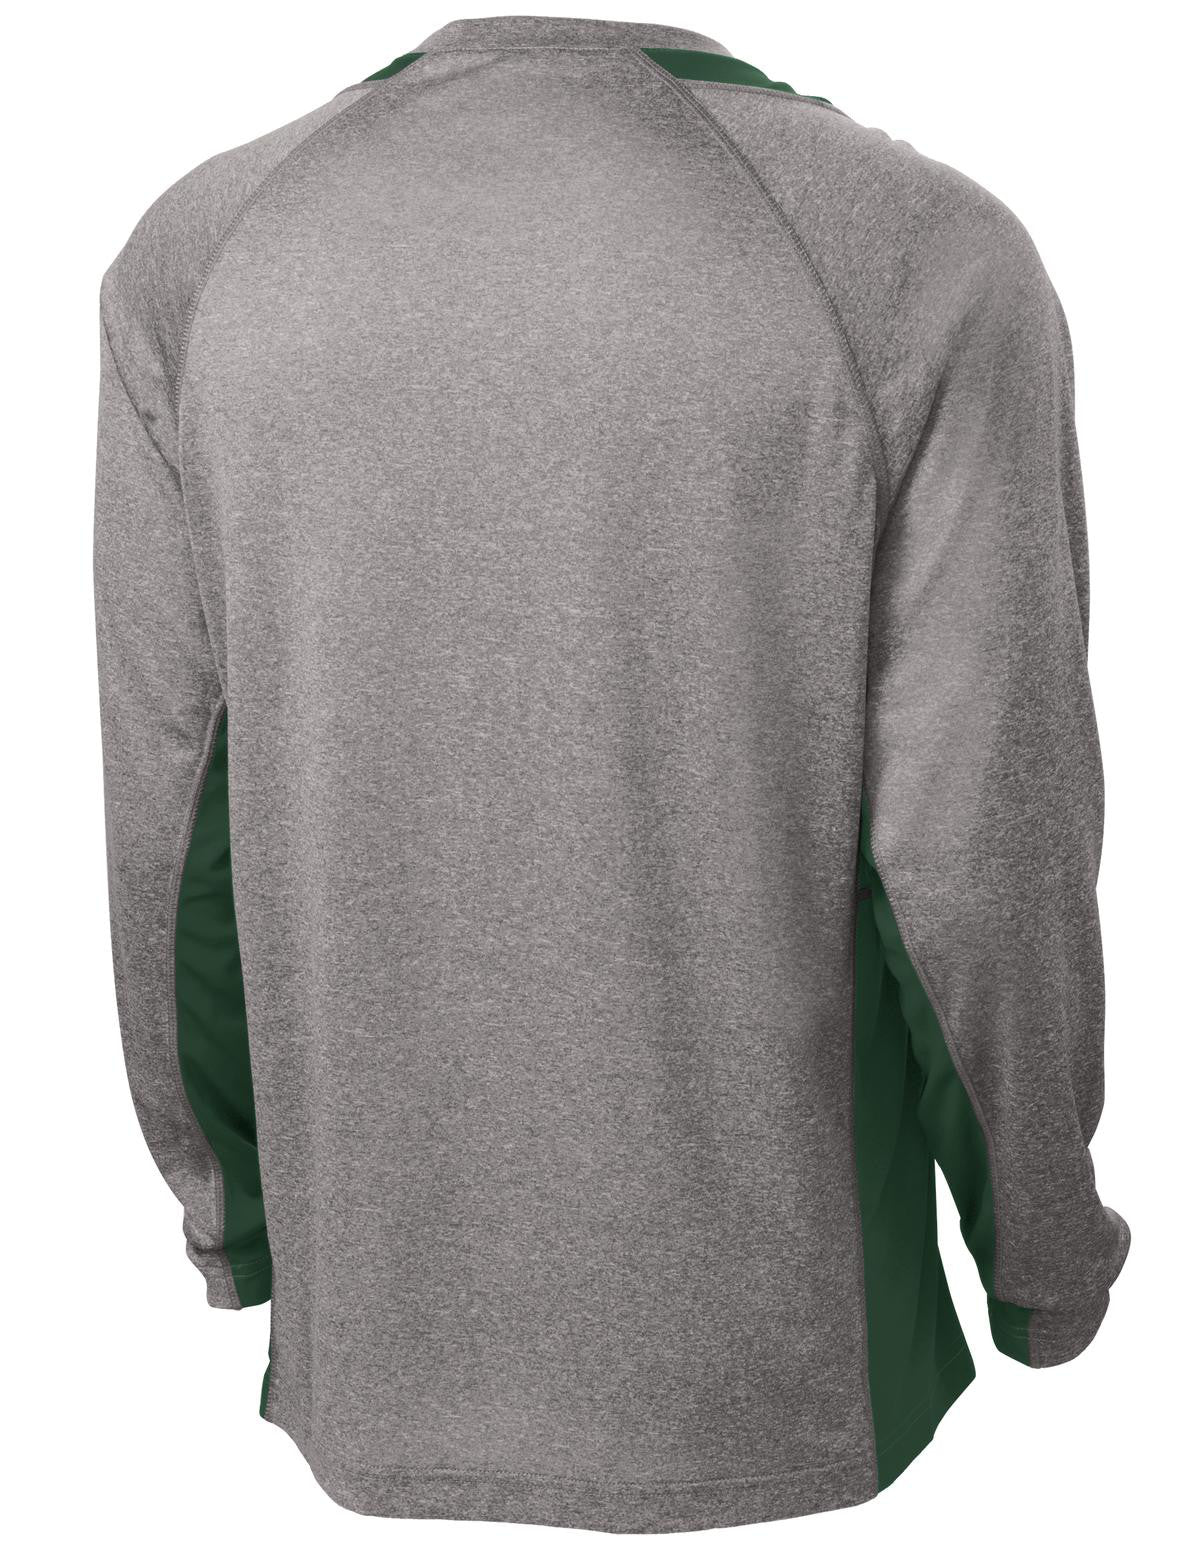 Mafoose Men's Long Sleeve Heather Colorblock Contender Tee Shirt Vintage Heather/ Forest Green-Back